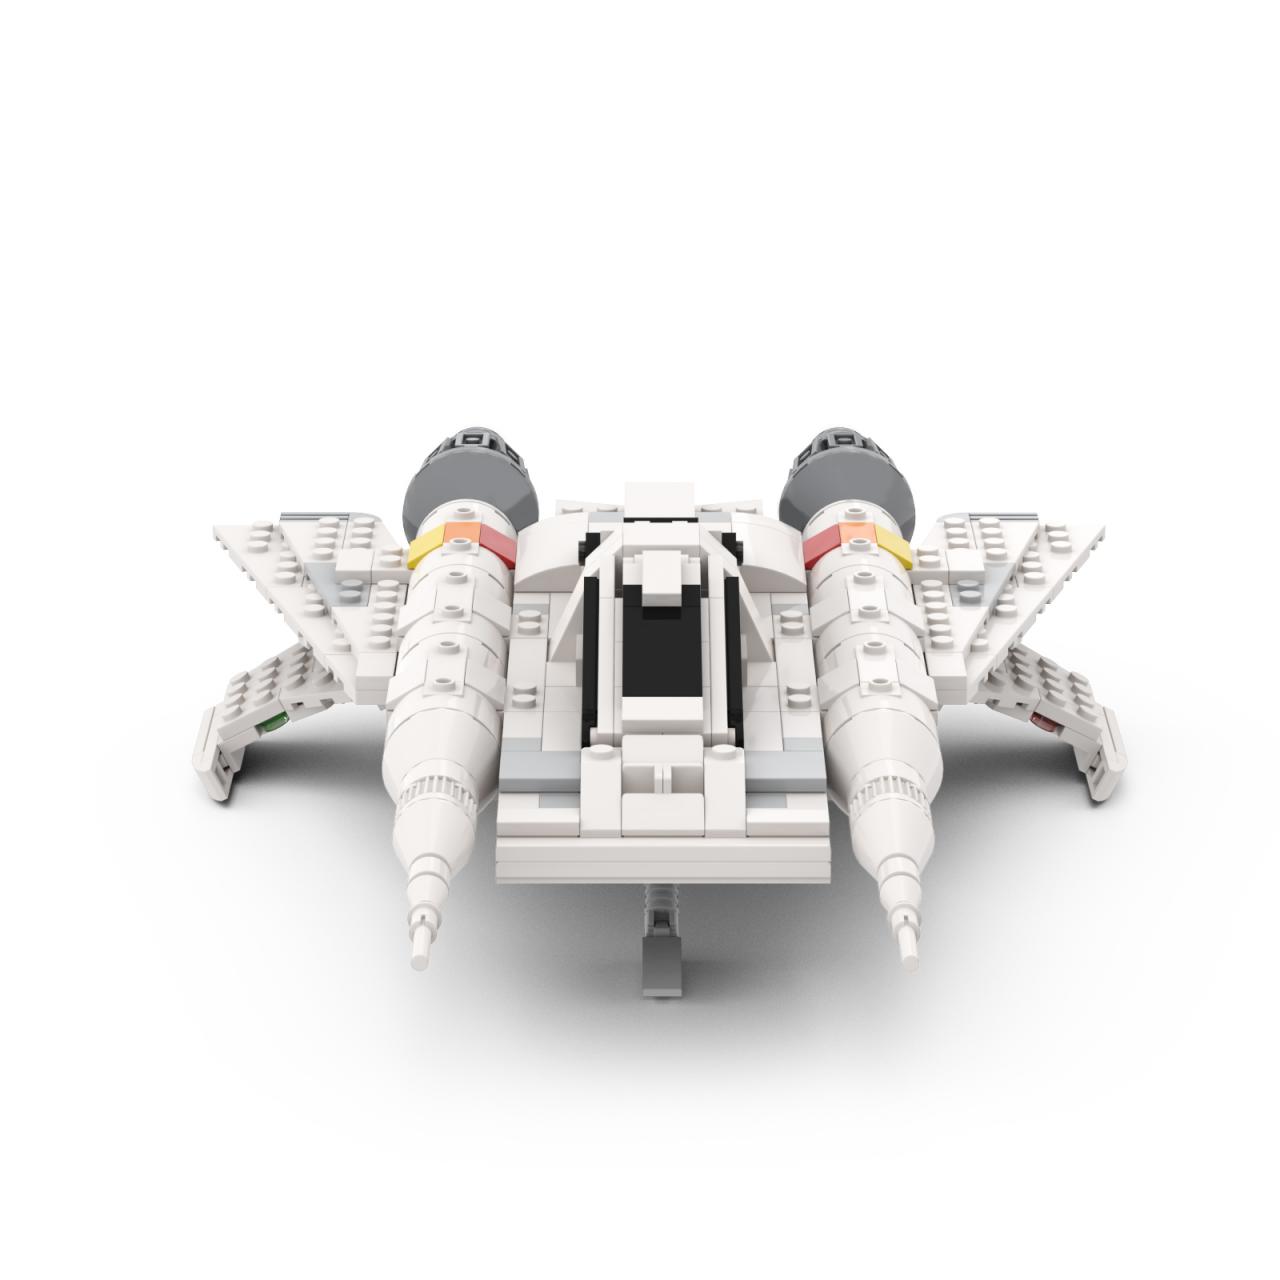 moc 48610 buck rogers starfighter ship with 548 pieces 2 - LEPIN Germany